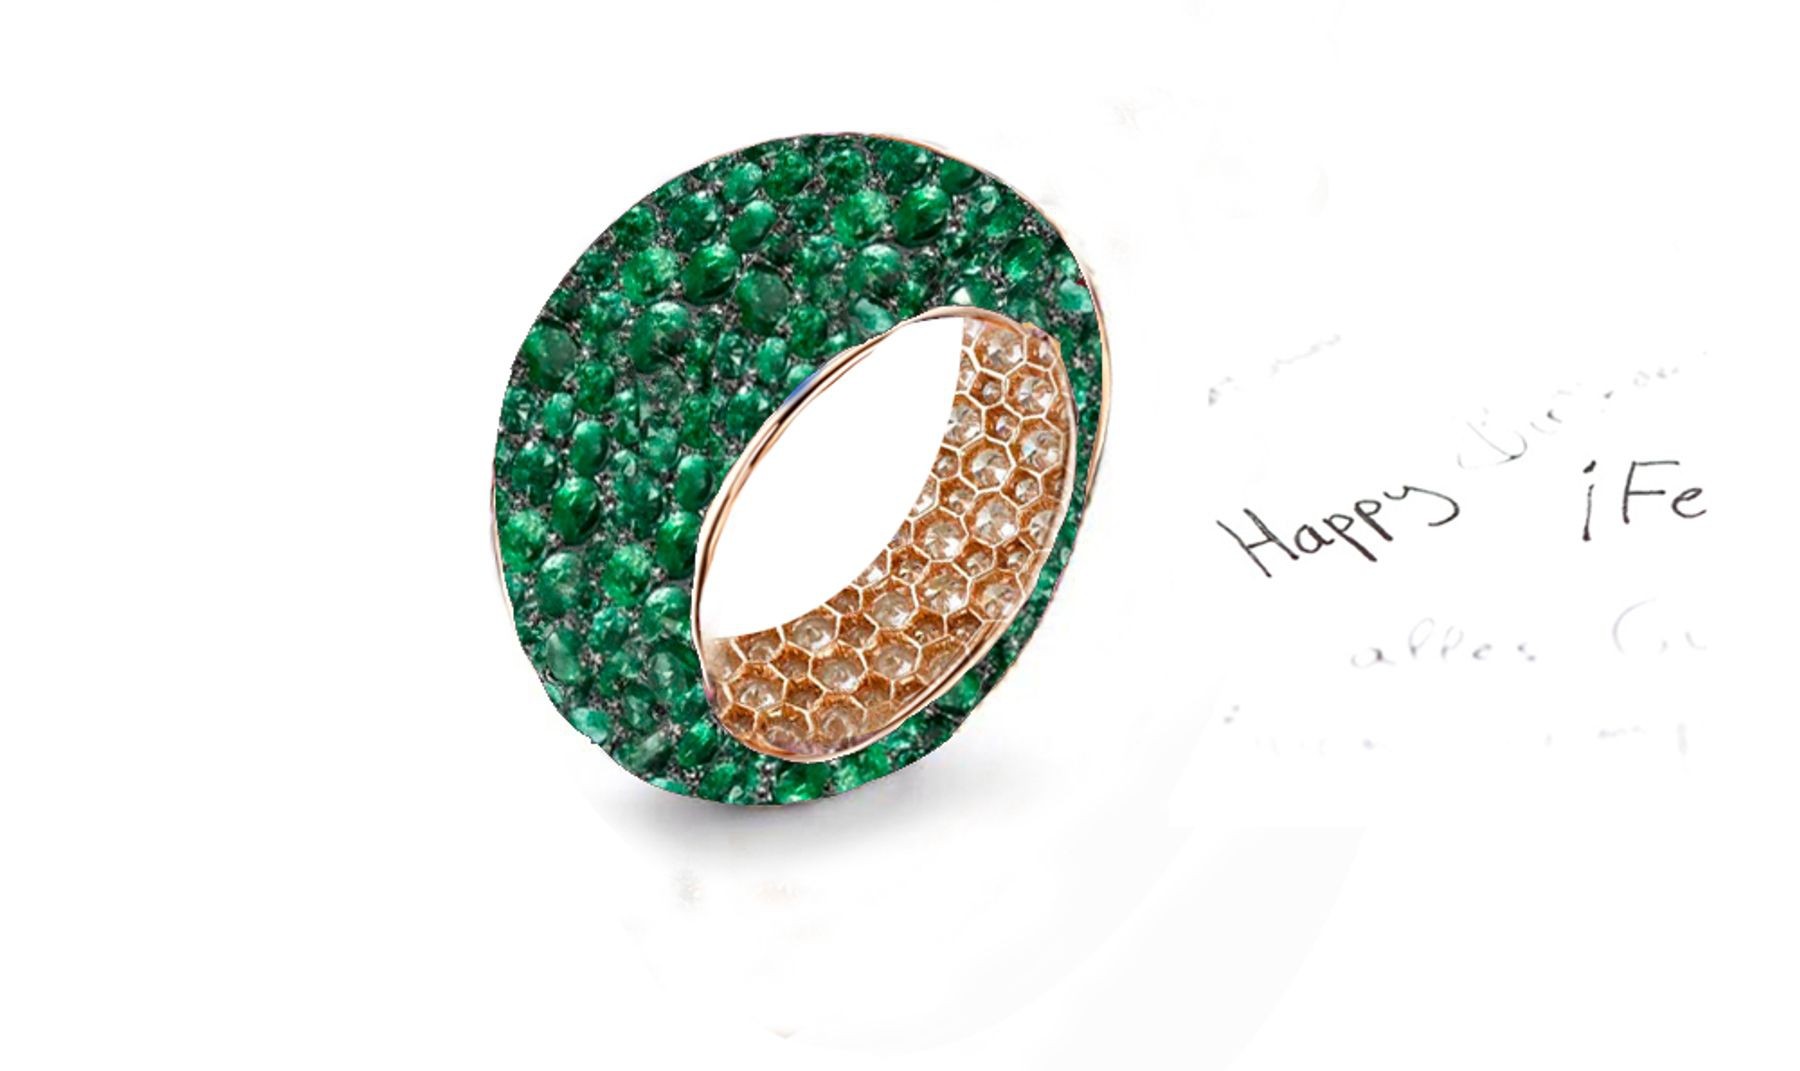 Made To Order Eternity Band Rings Featuring High Quality Diamonds & Green Emeralds